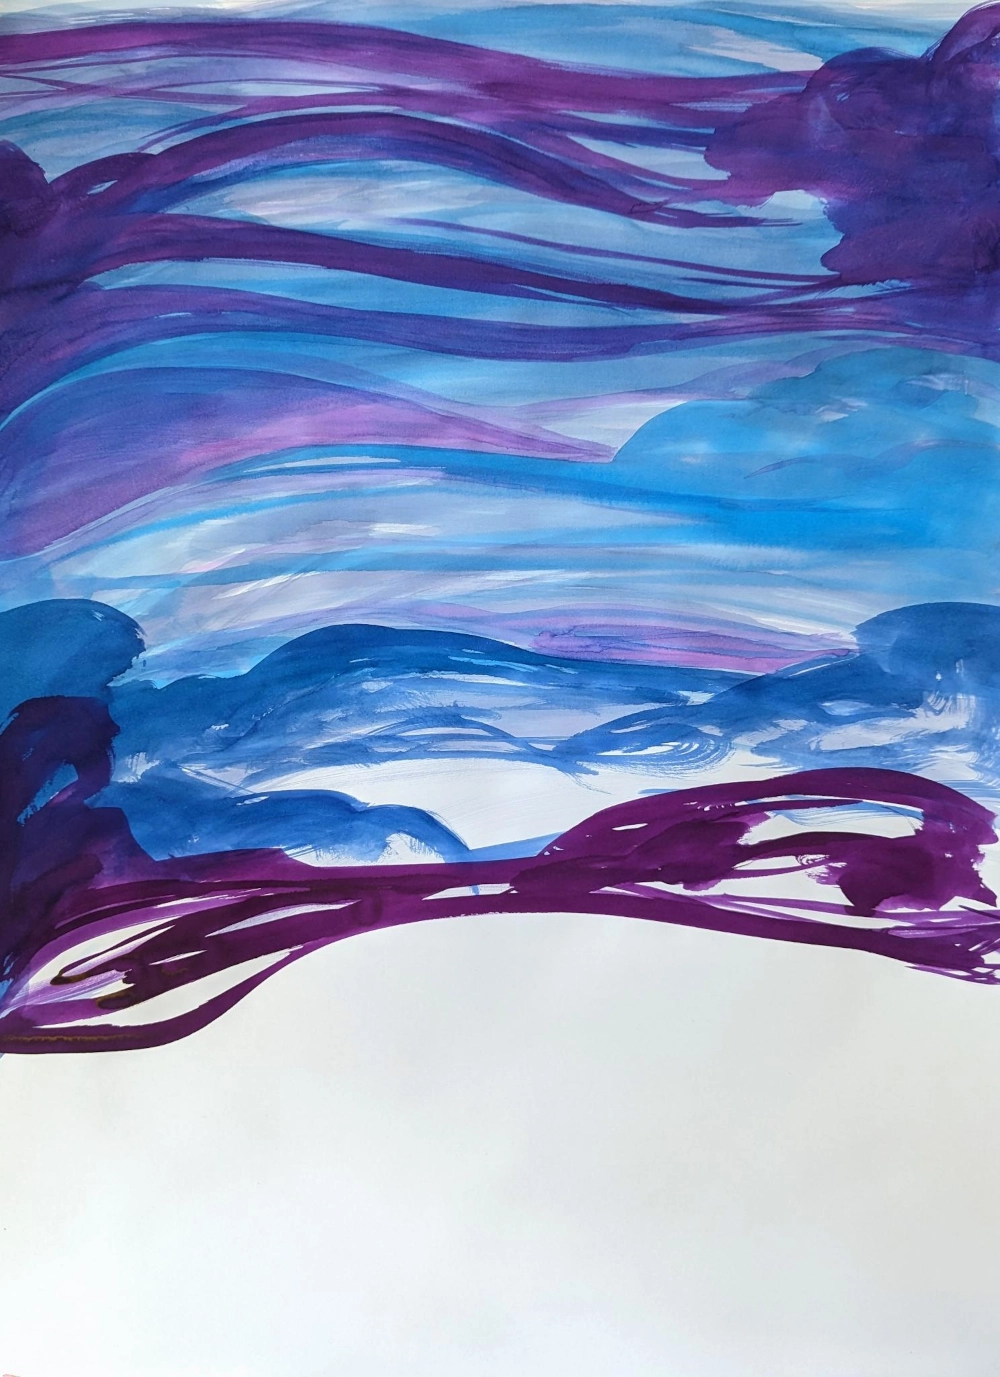 Ink drawing of layered clouds above a blank expanse